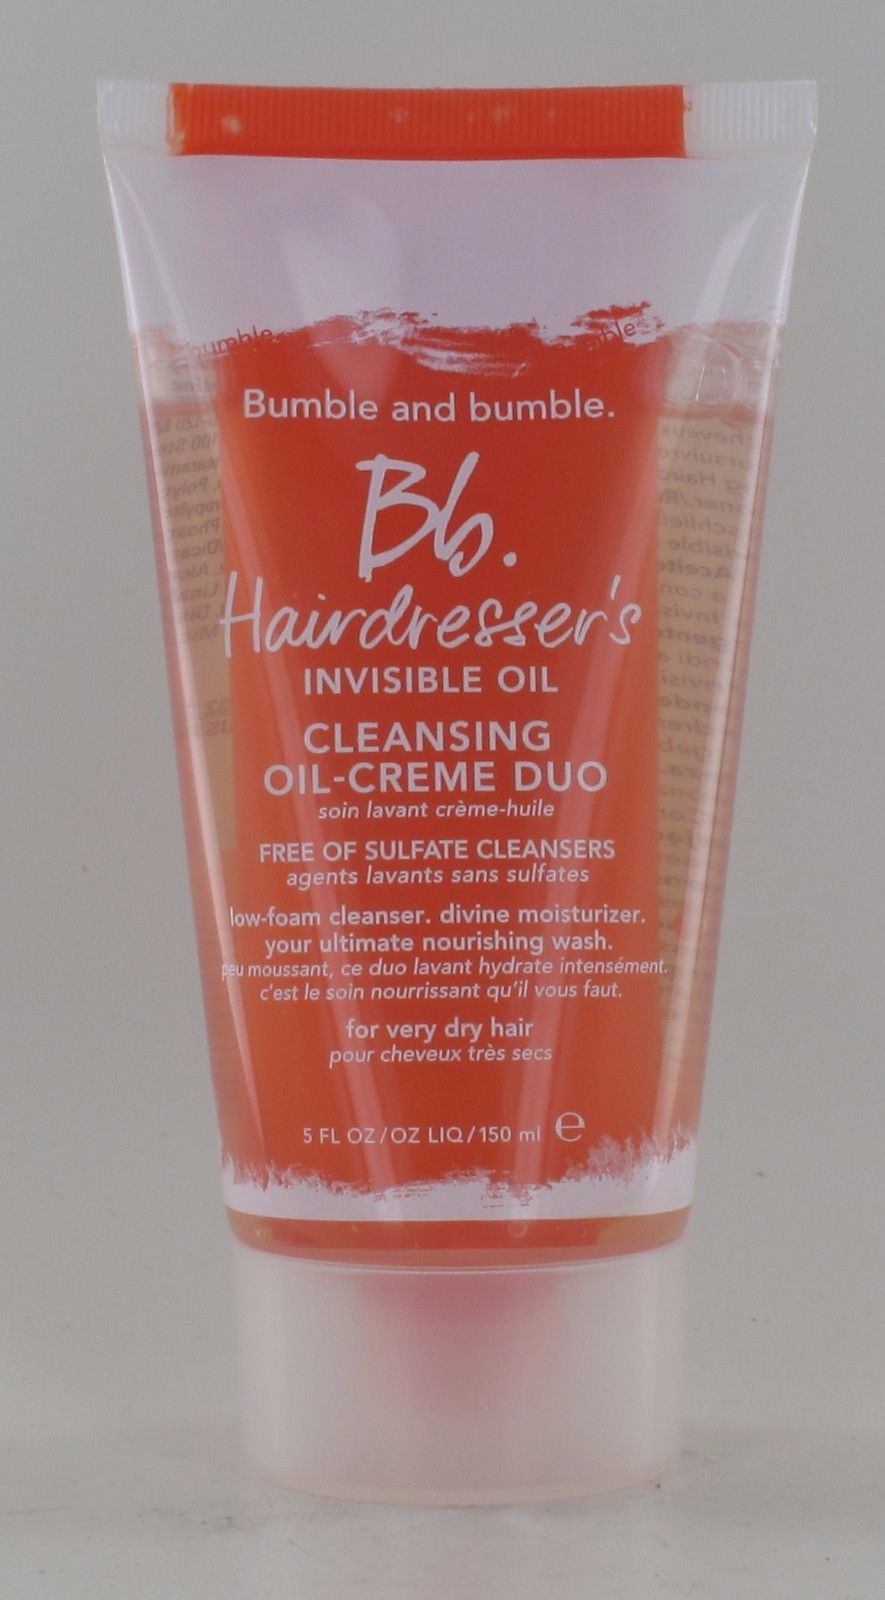 Bumble And Bumble Hairdressers Invisible Oil Cleansing Oil-Creme Duo, 5oz